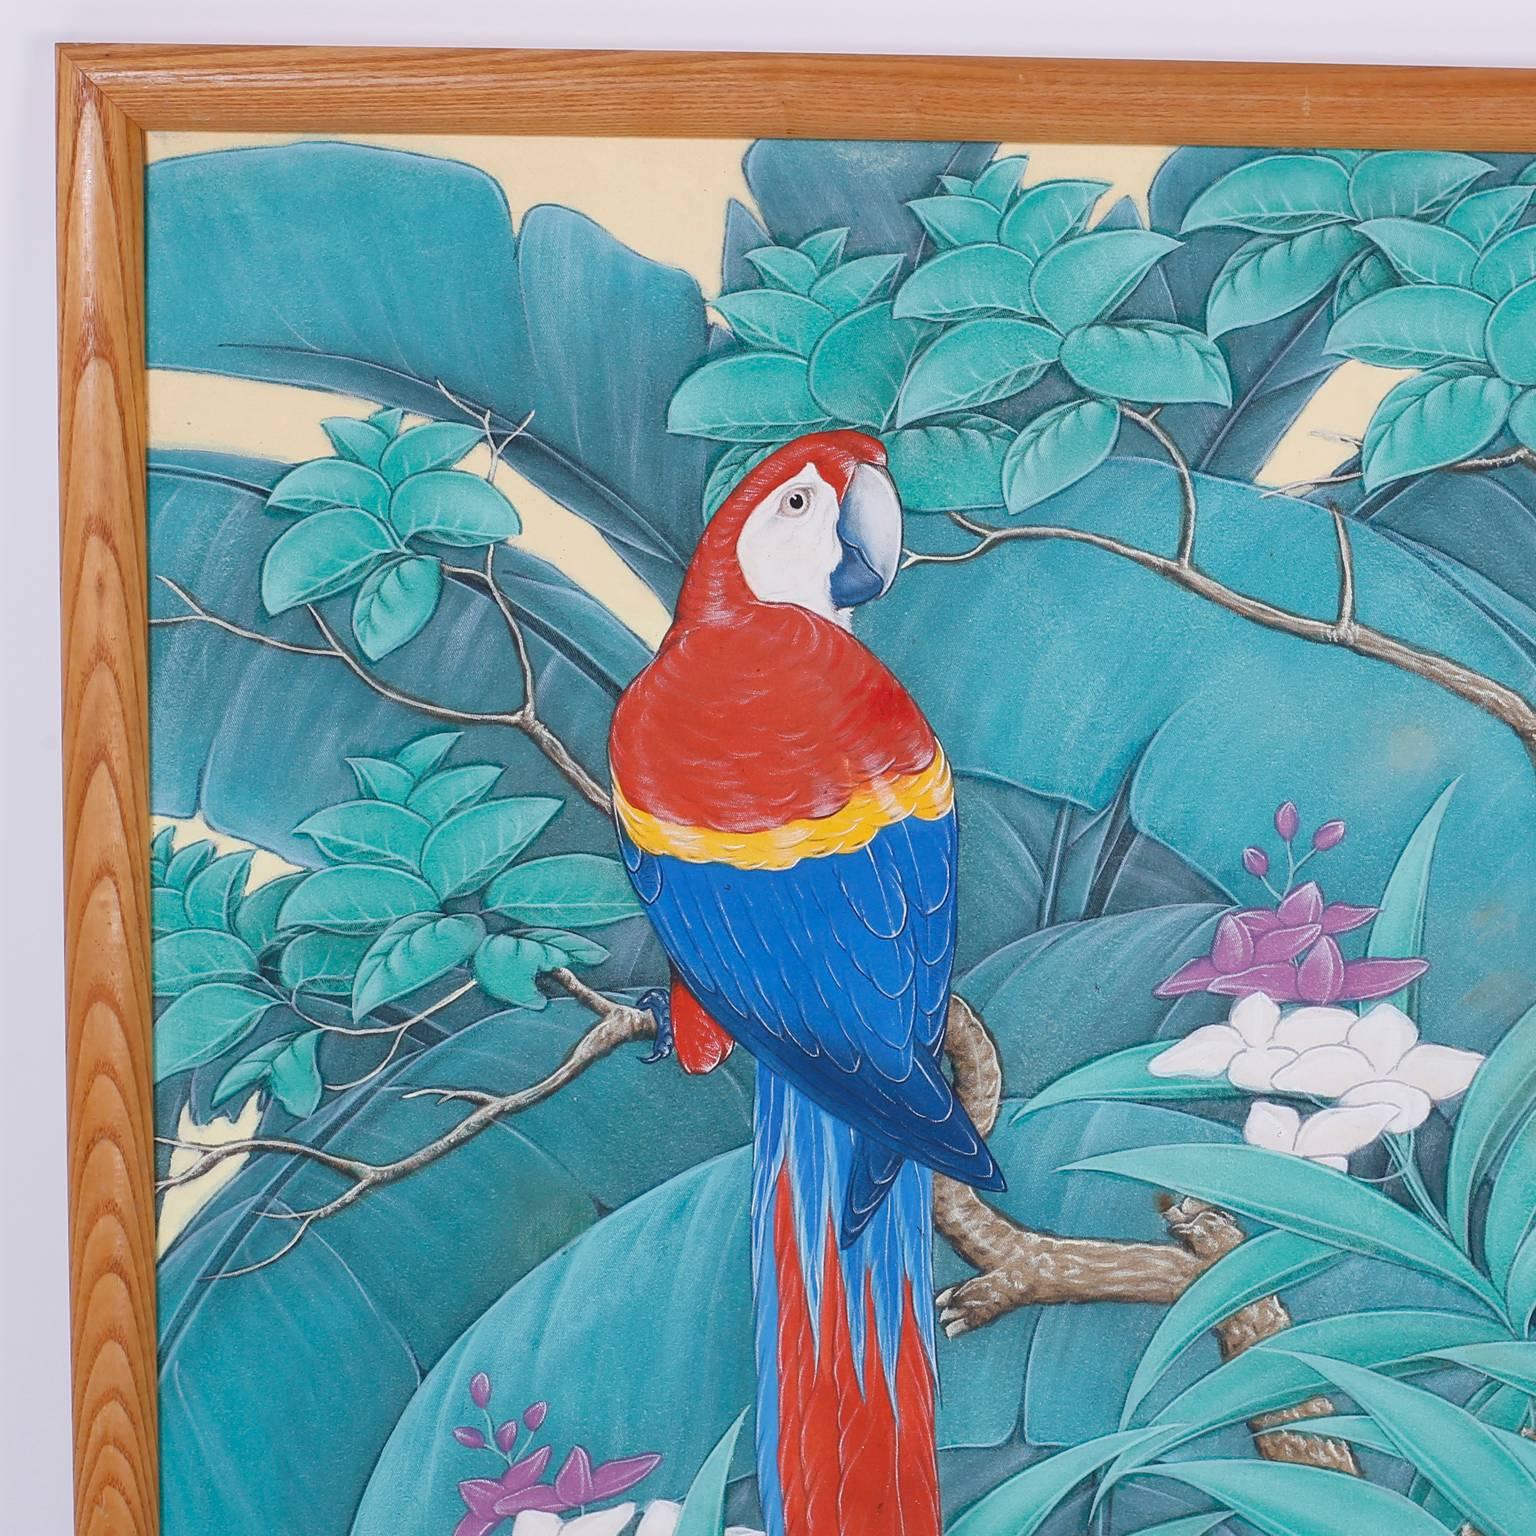 Bold, colorful painting of three parrots in their natural habitat. Expertly painted on linen with acrylics and presented in an oak frame. Signed indistinctly in the lower right.